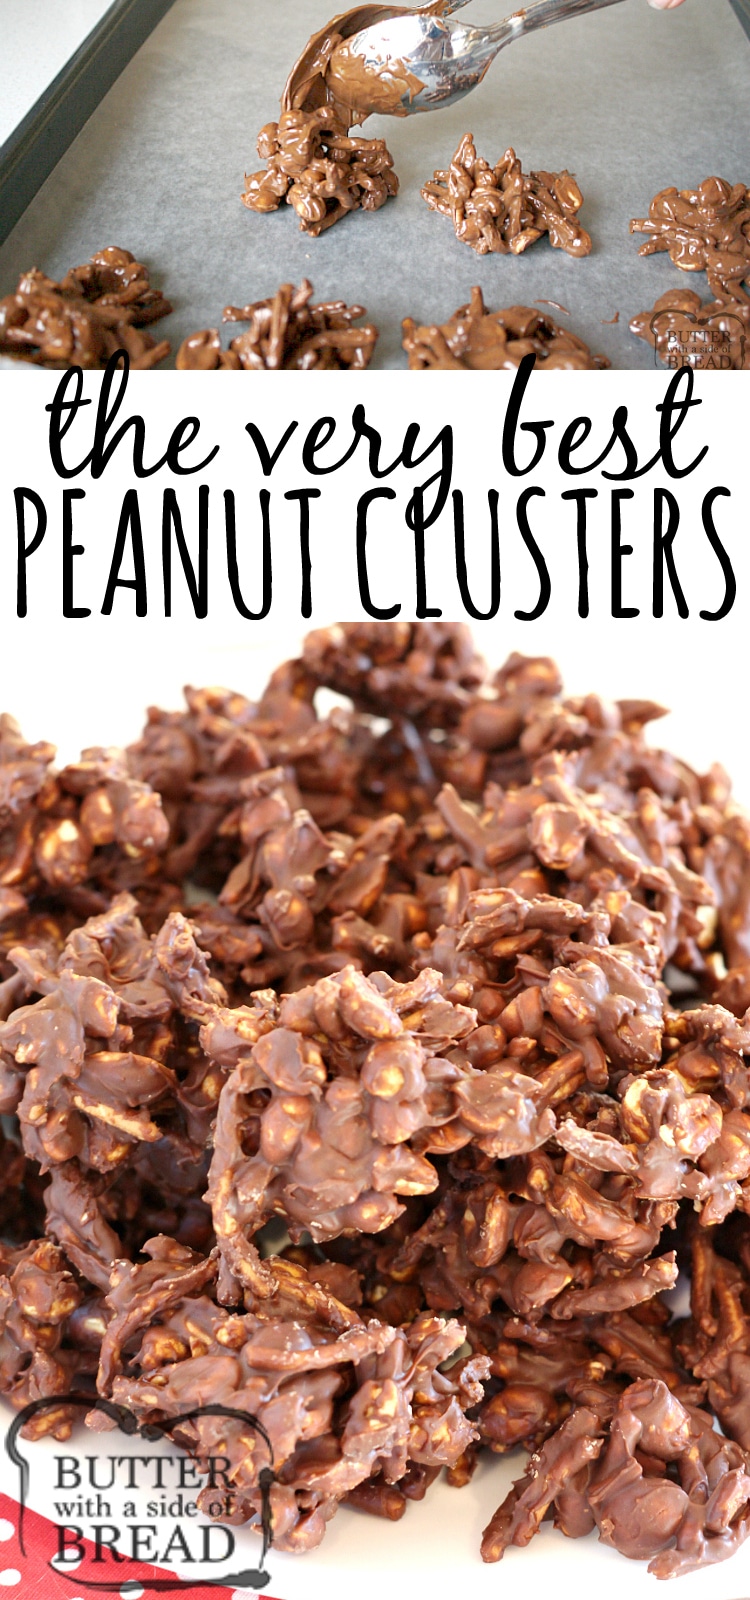 Peanut Clusters are the easiest no-bake treats to make with just four ingredients - chocolate chips, butterscotch chips, peanuts and crunchy chow mein noodles! This Peanut Cluster recipe is the best one that I've tried and you can make a whole batch in just a few minutes!